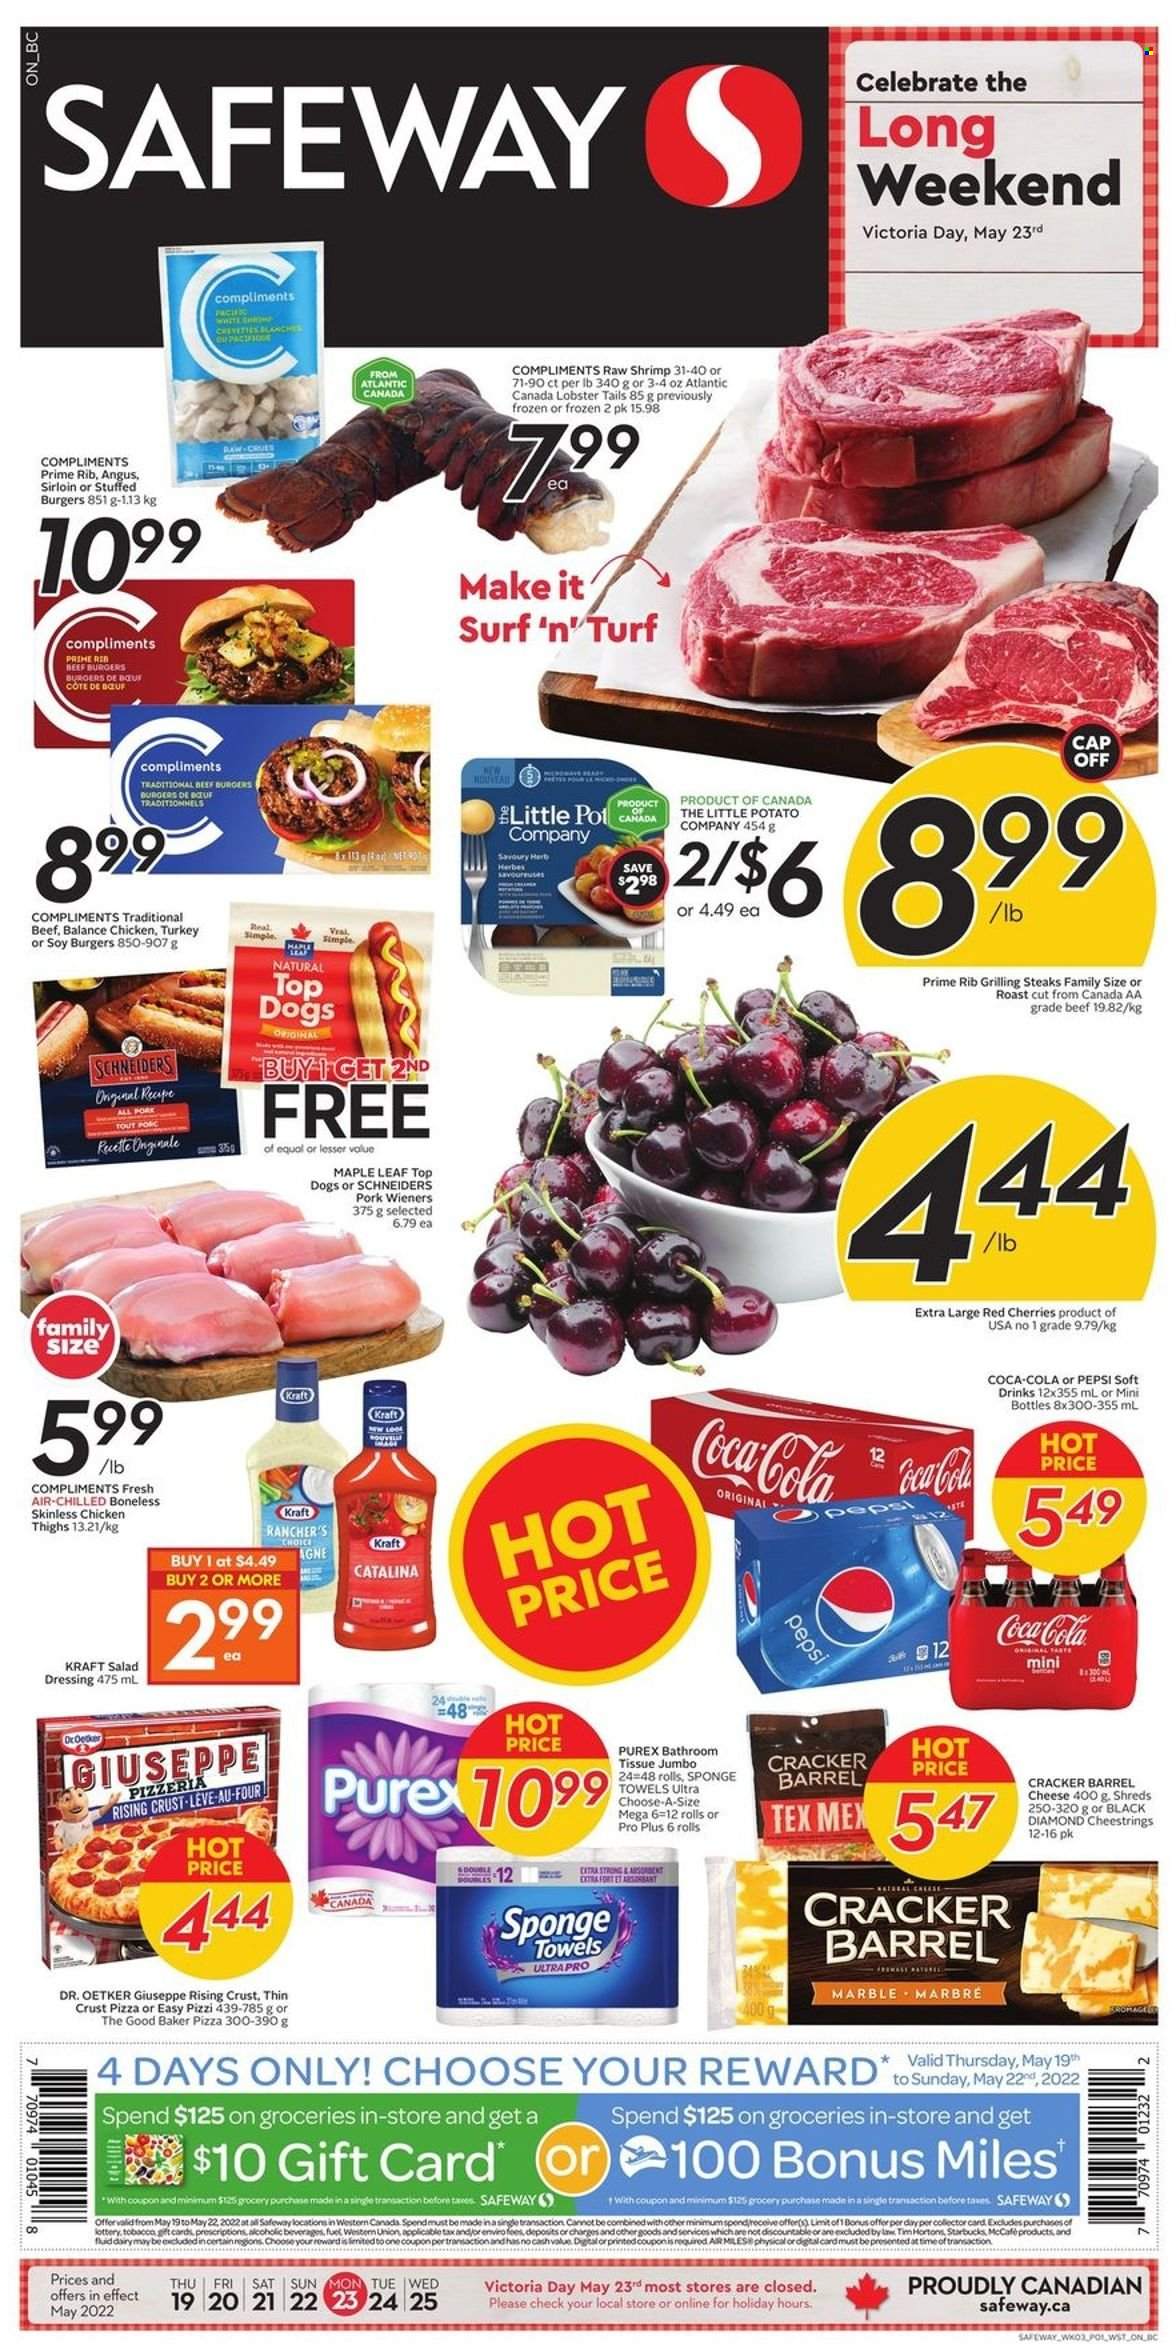 thumbnail - Safeway Flyer - May 19, 2022 - May 25, 2022 - Sales products - cherries, lobster, lobster tail, shrimps, hamburger, beef burger, Kraft®, roast, Fuet, frankfurters, pâté, string cheese, cheese, Dr. Oetker, salad dressing, dressing, Coca-Cola, Pepsi, soft drink, carbonated soft drink, Starbucks, McCafe, chicken thighs, chicken, steak, bath tissue, kitchen towels, paper towels, Purex, pot. Page 1.